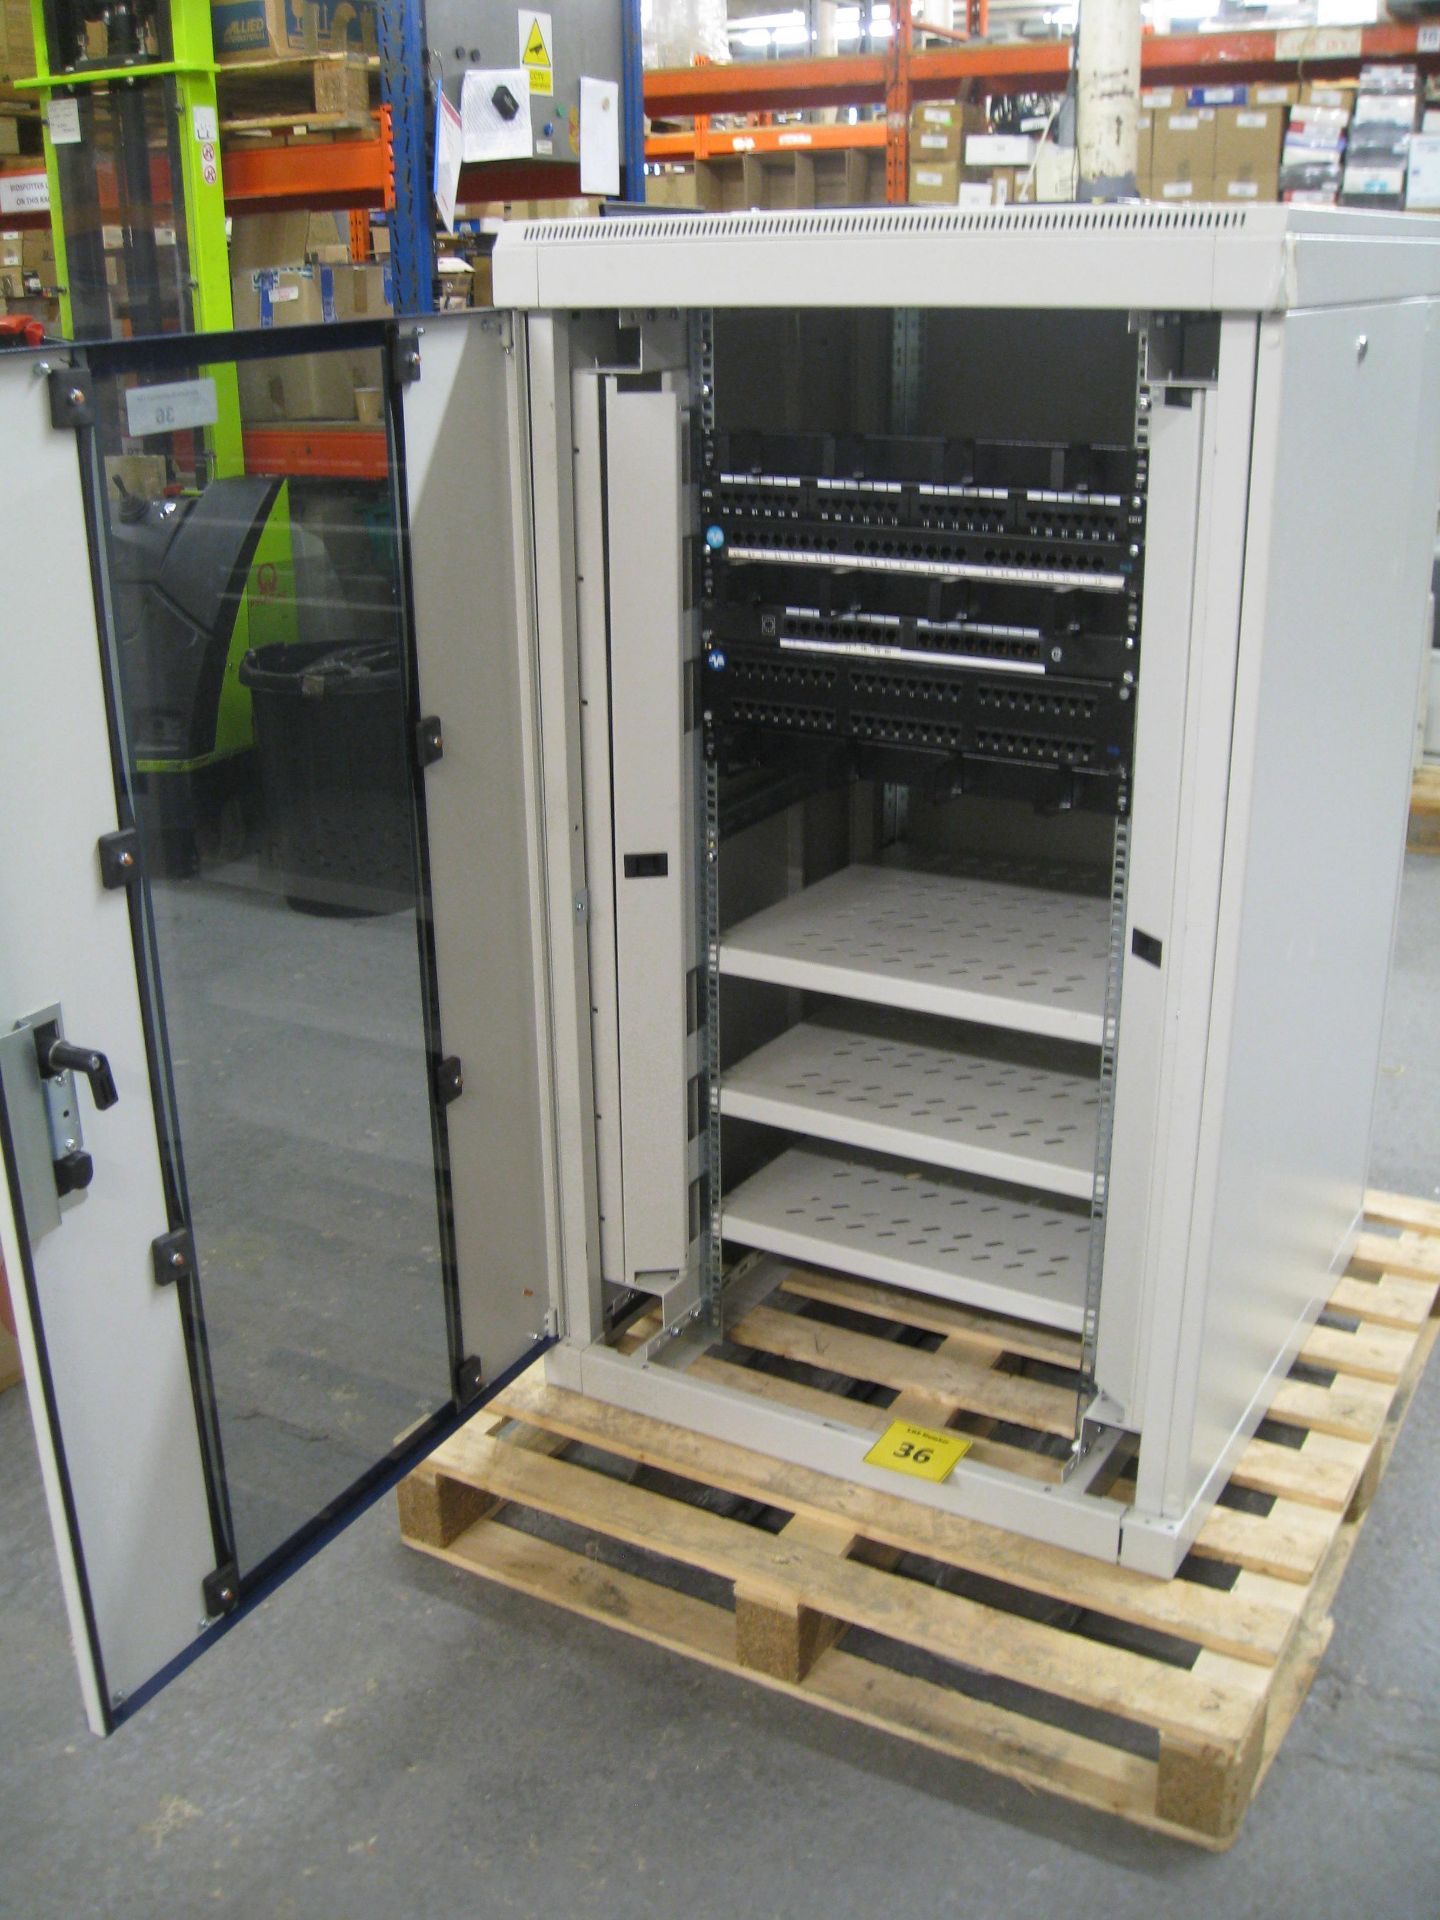 COMMS CABINET. 127CM TALL, 78CM WIDE & 82CM DEEP. WITH 3 SHELVES, 4 X PATCH PANELS AND FAN PANE;L ON - Image 2 of 3